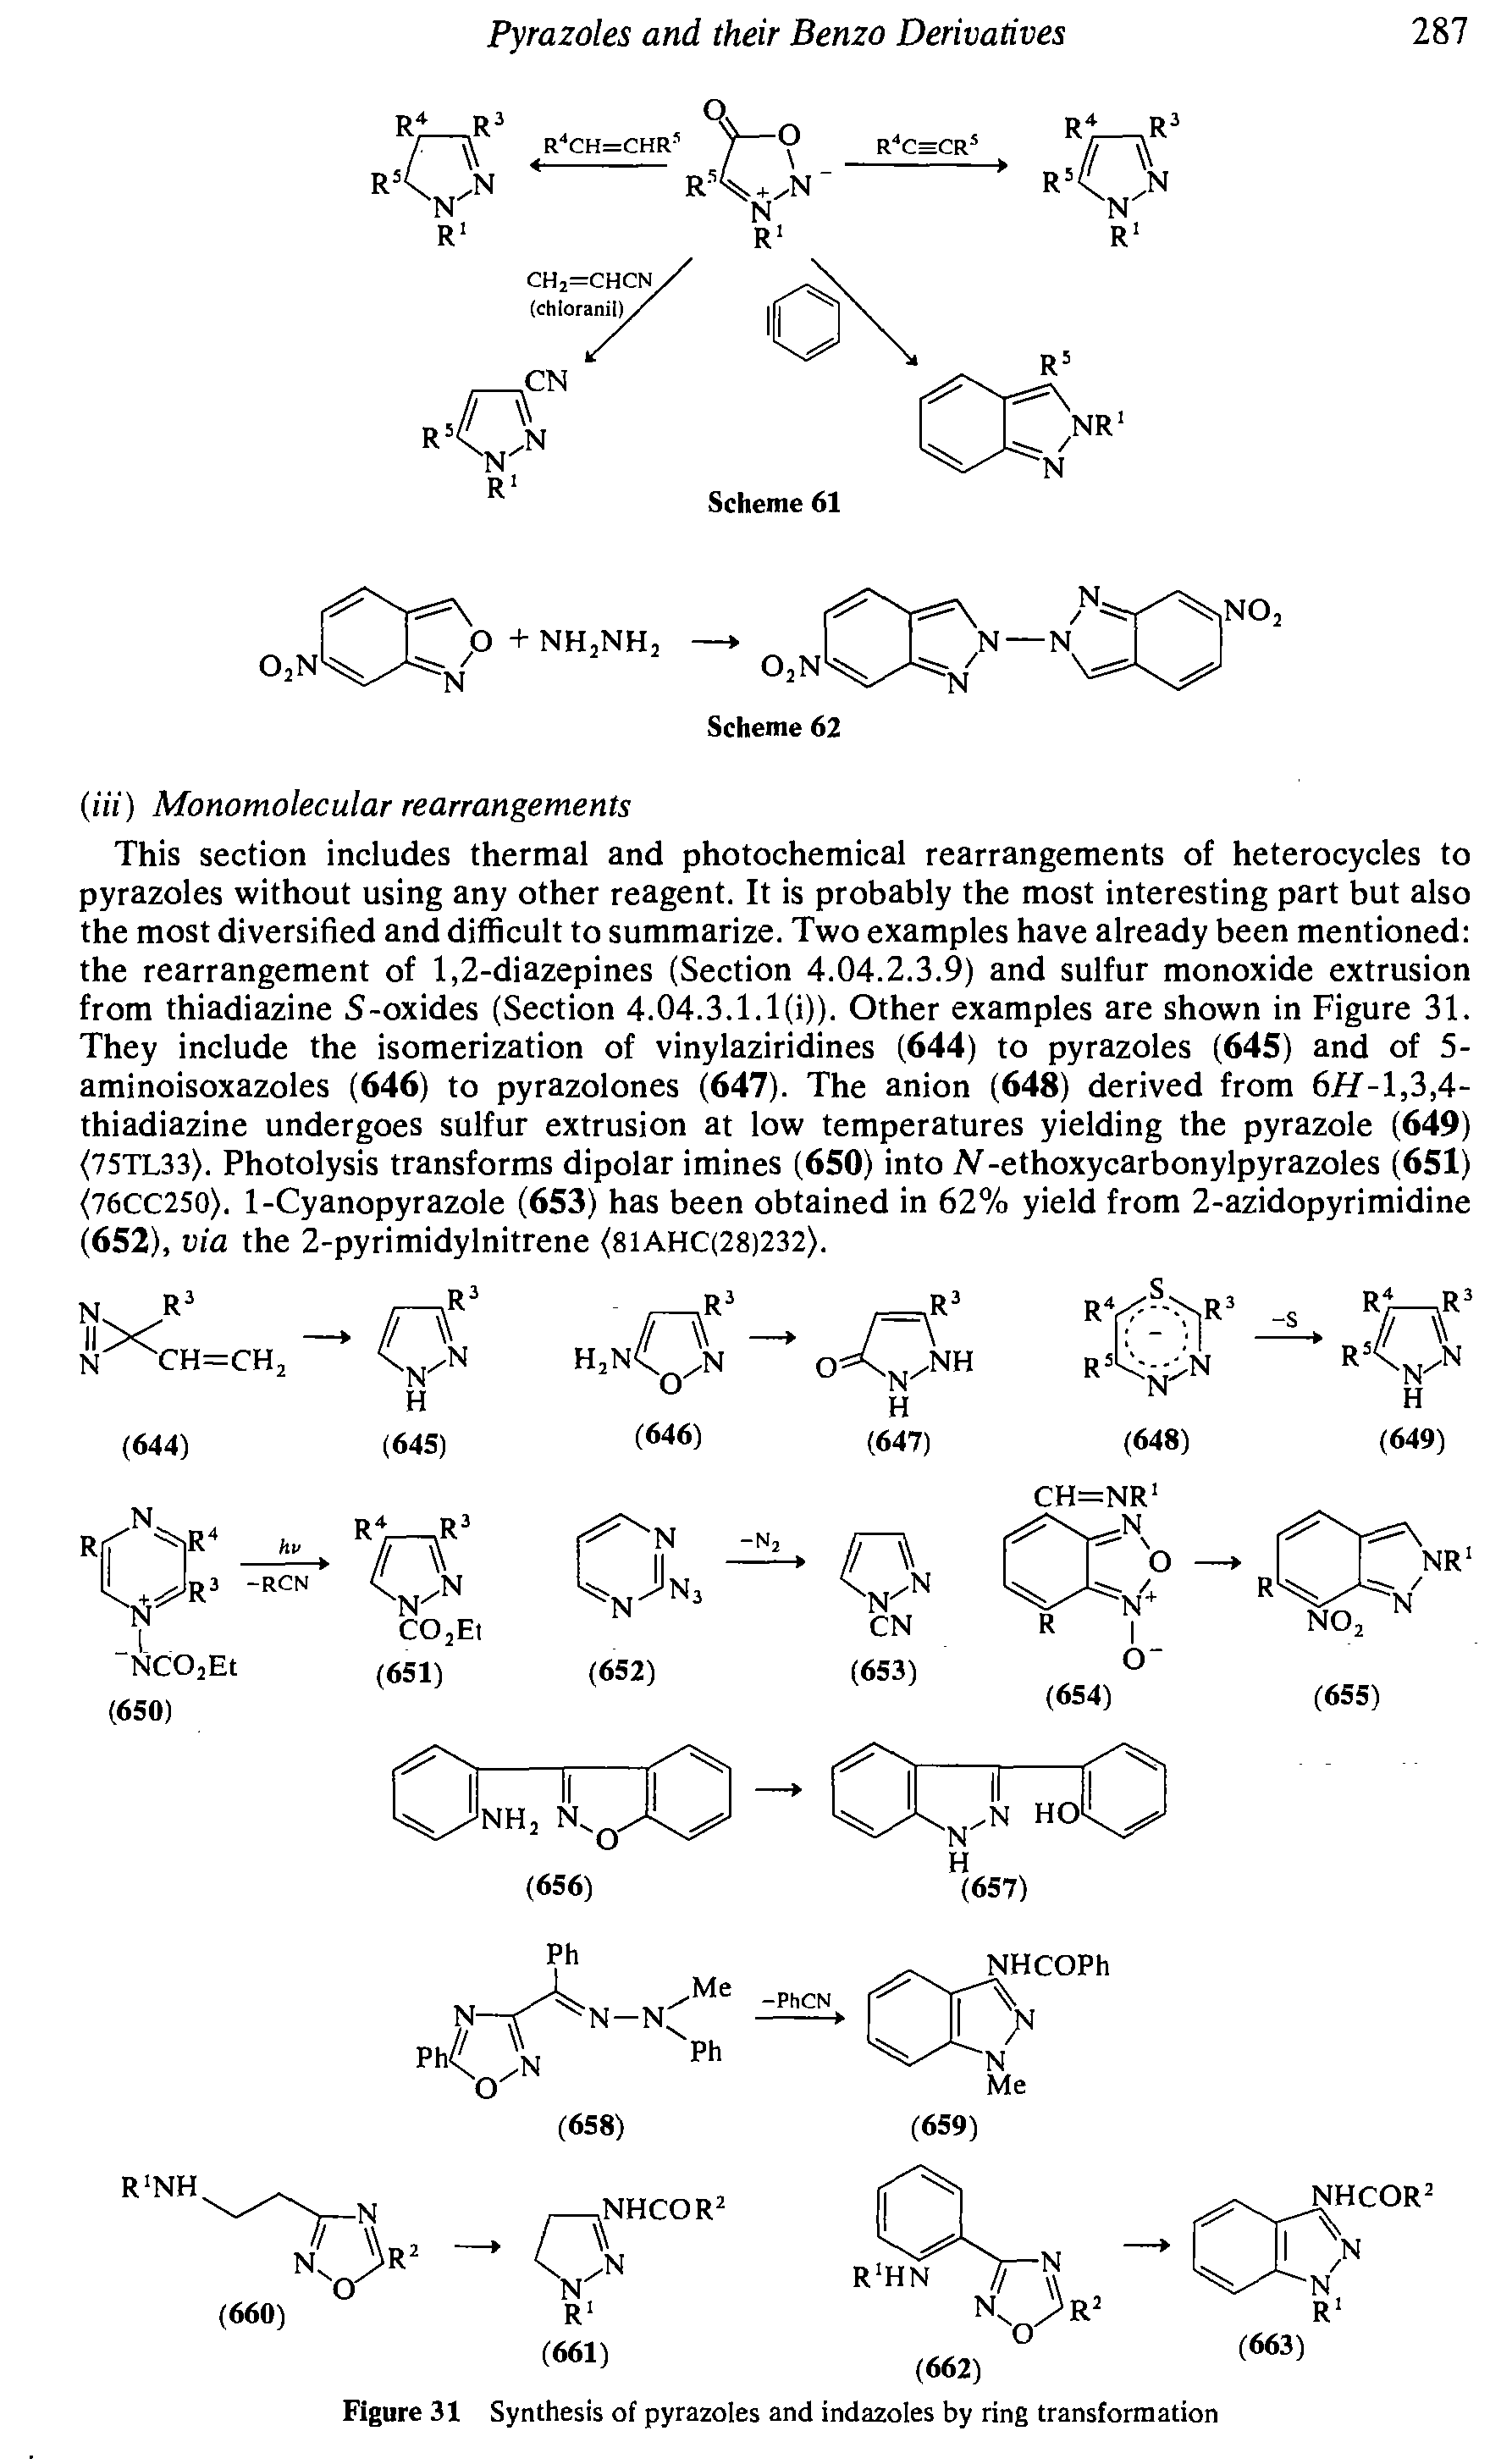 Figure 31 Synthesis of pyrazoles and indazoles by ring transformation...